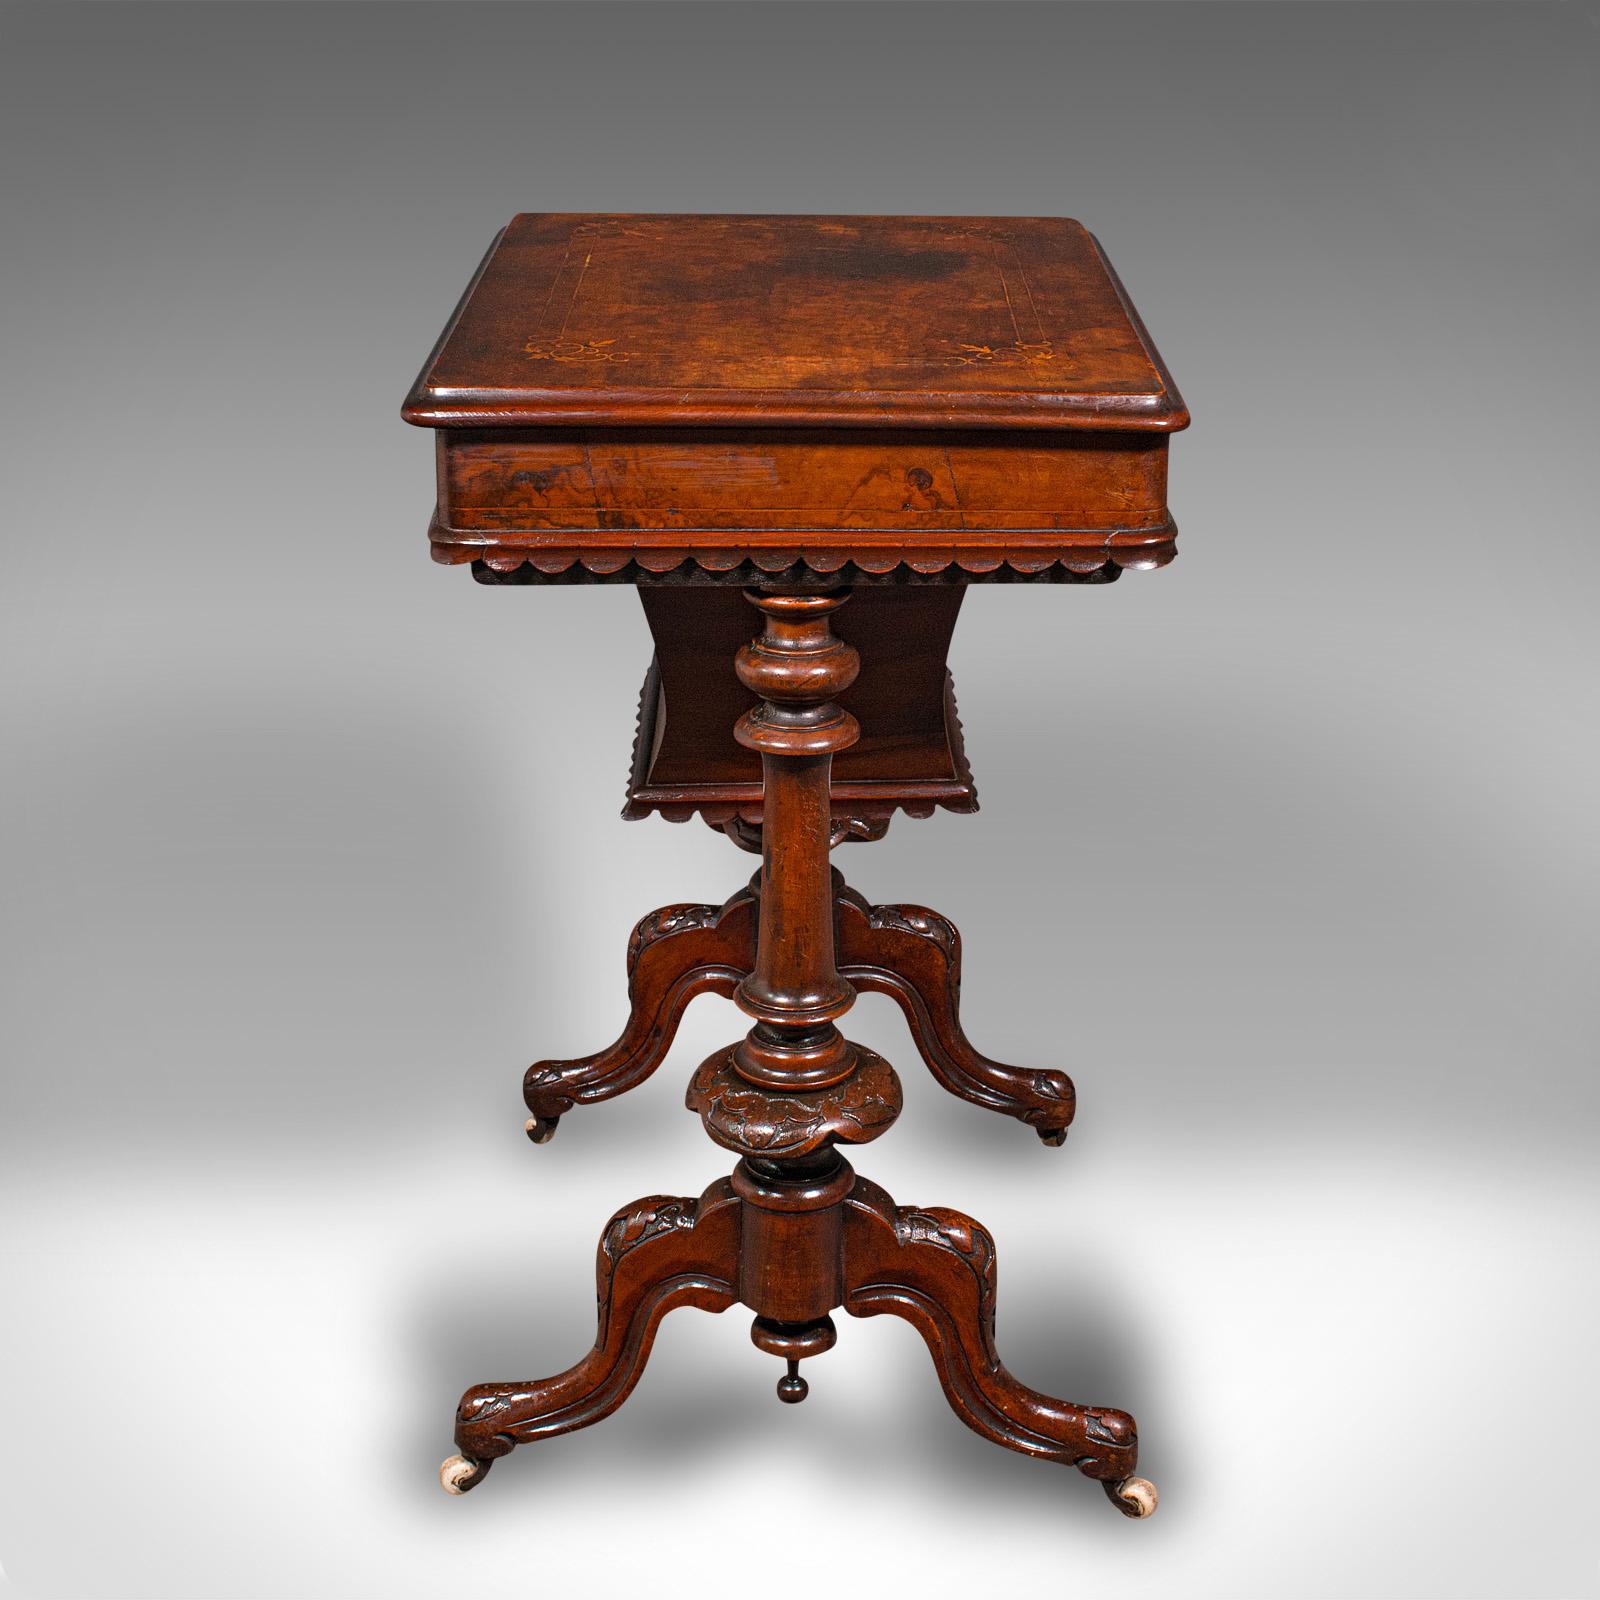 British Antique Ladies Work Table, English, Burr Walnut, Sewing Table, Victorian, C.1850 For Sale